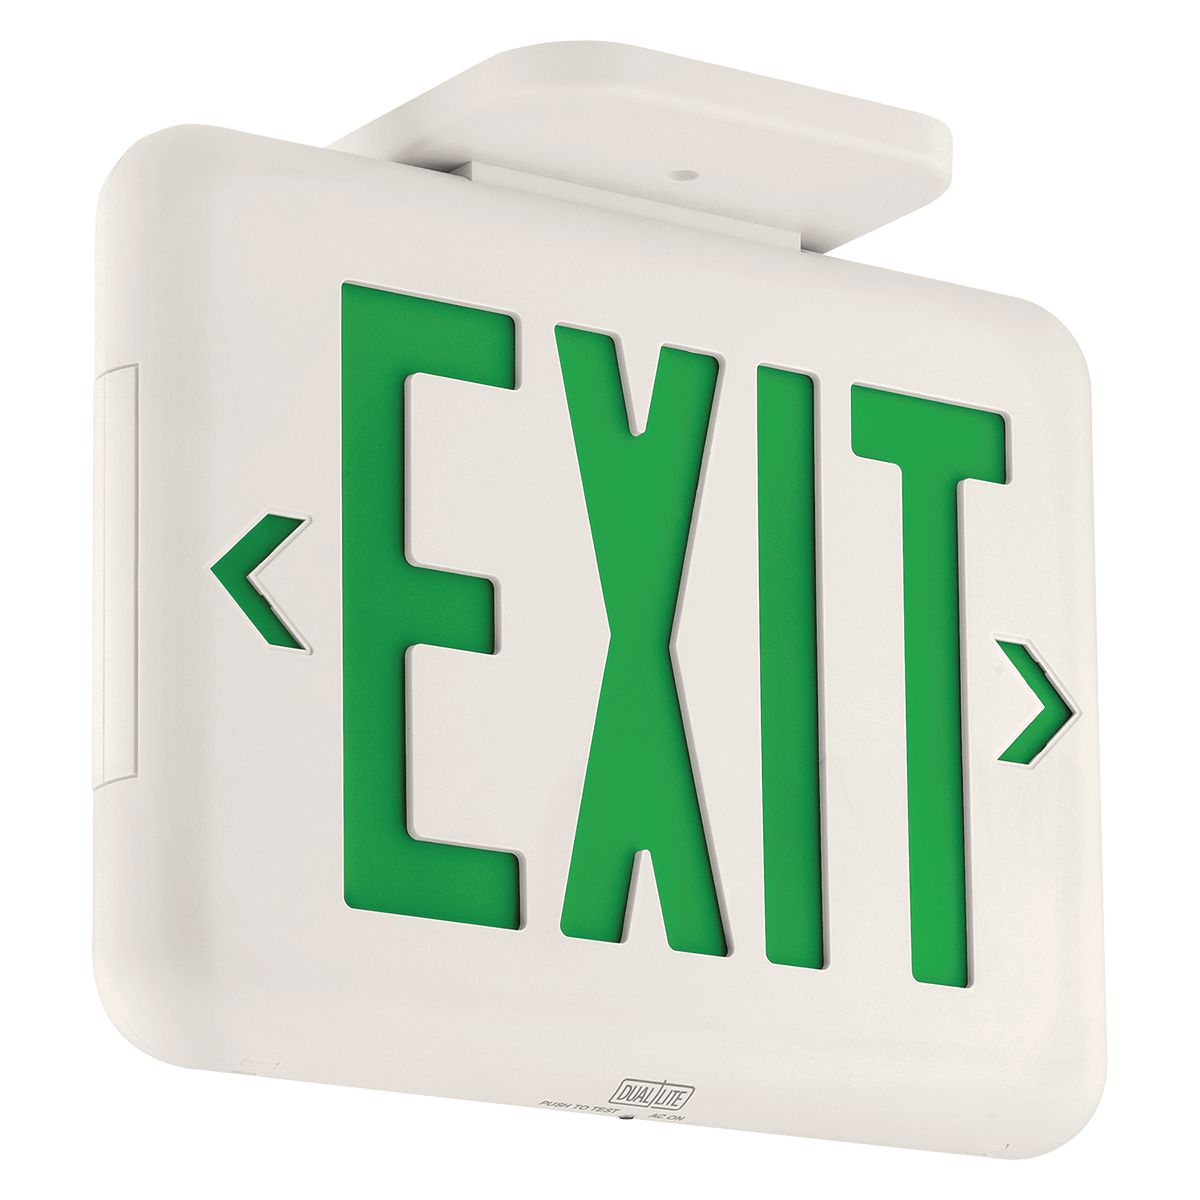 Stand Emer Exit w/ SD green text WH HSG